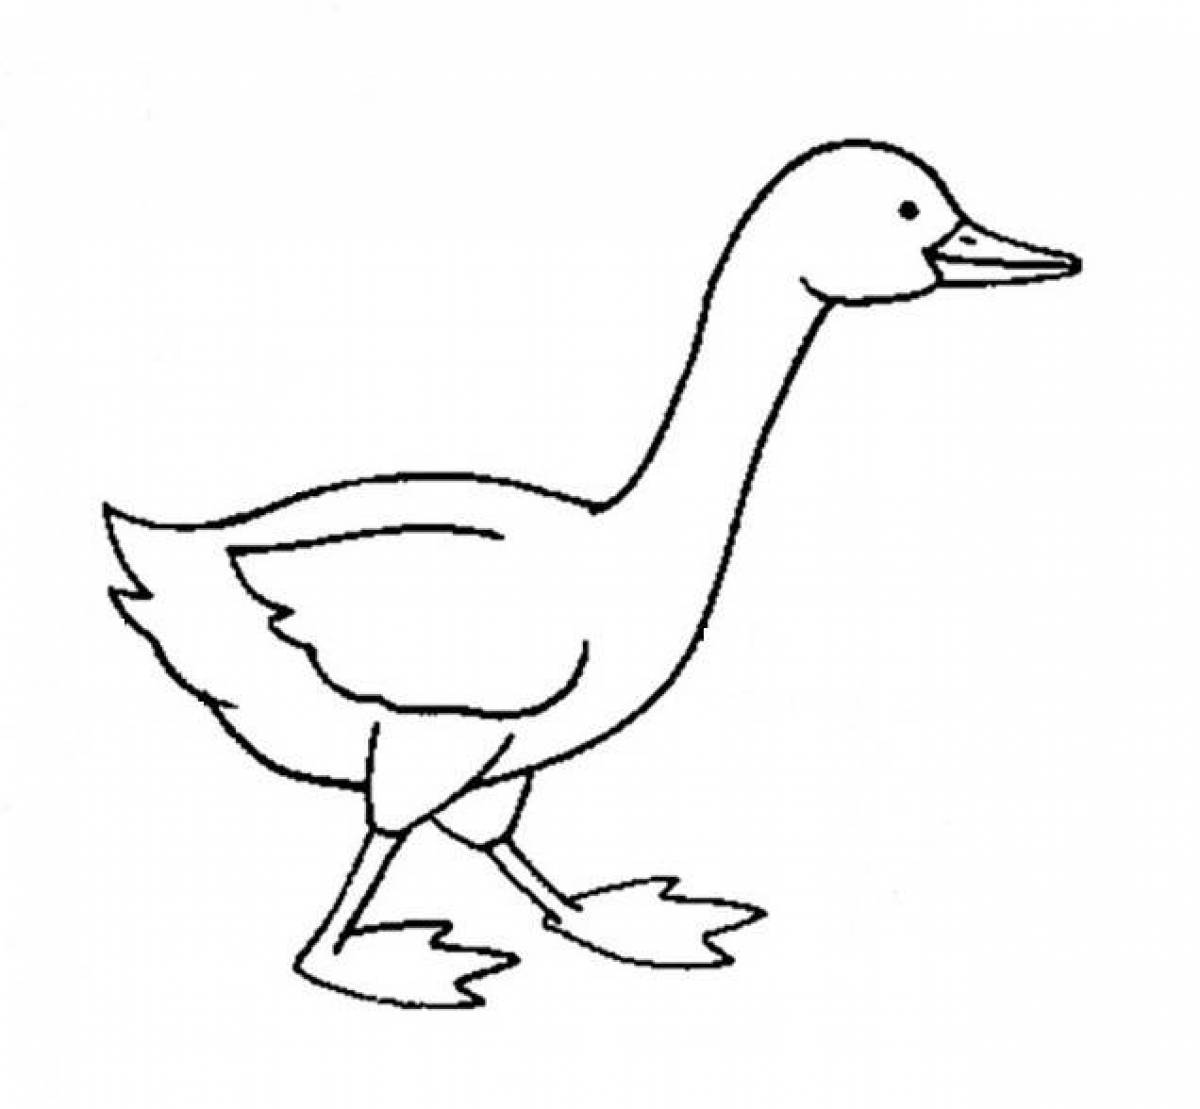 Glowing goose coloring book for kids